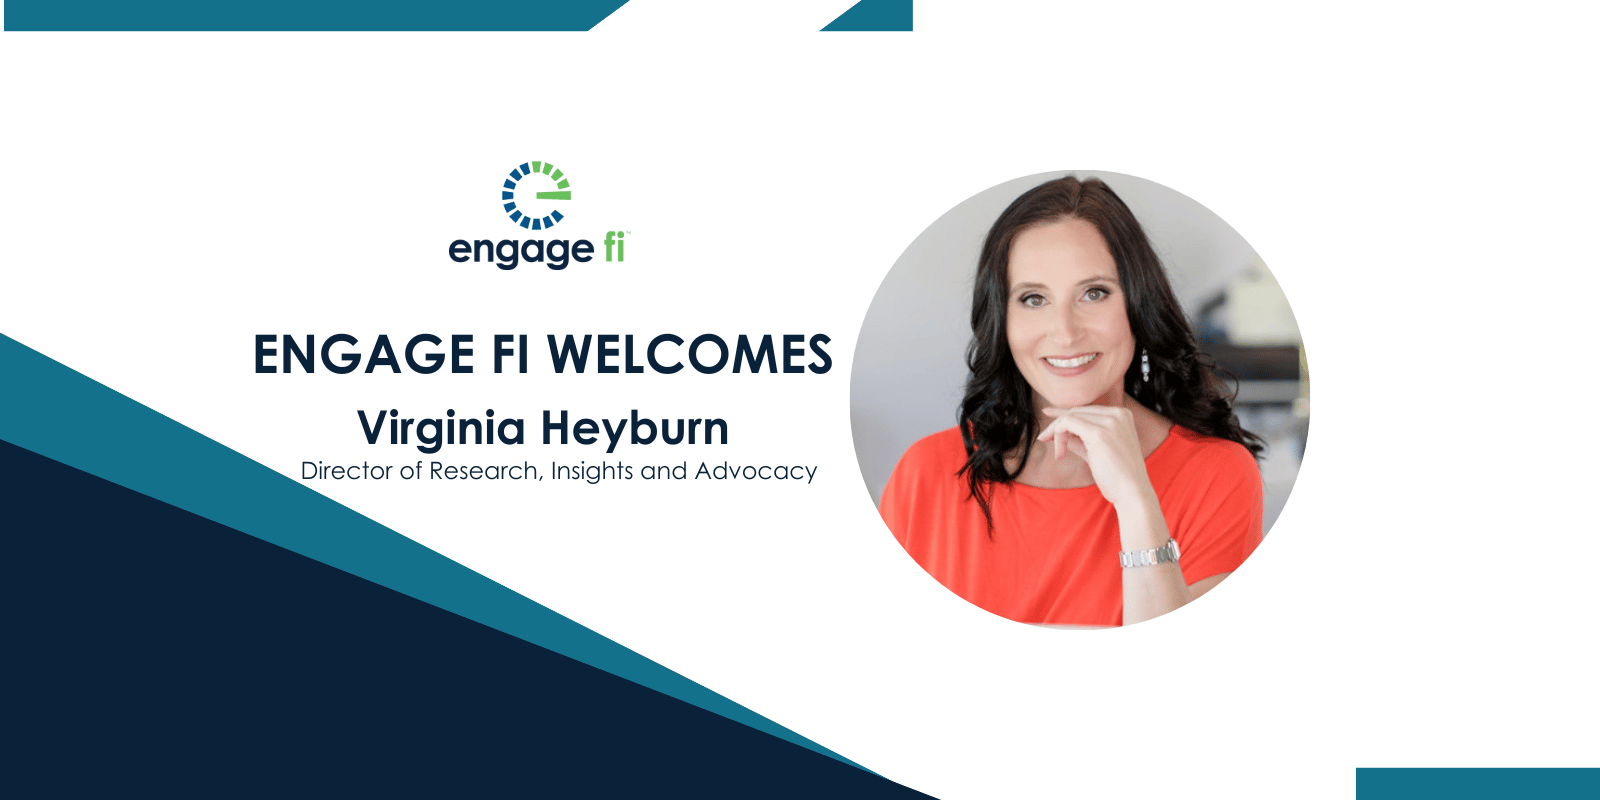 Engage fi Focuses on Financial Services Thought Leadership; Appoints Virginia Heyburn as Director of Research, Insights and Advocacy